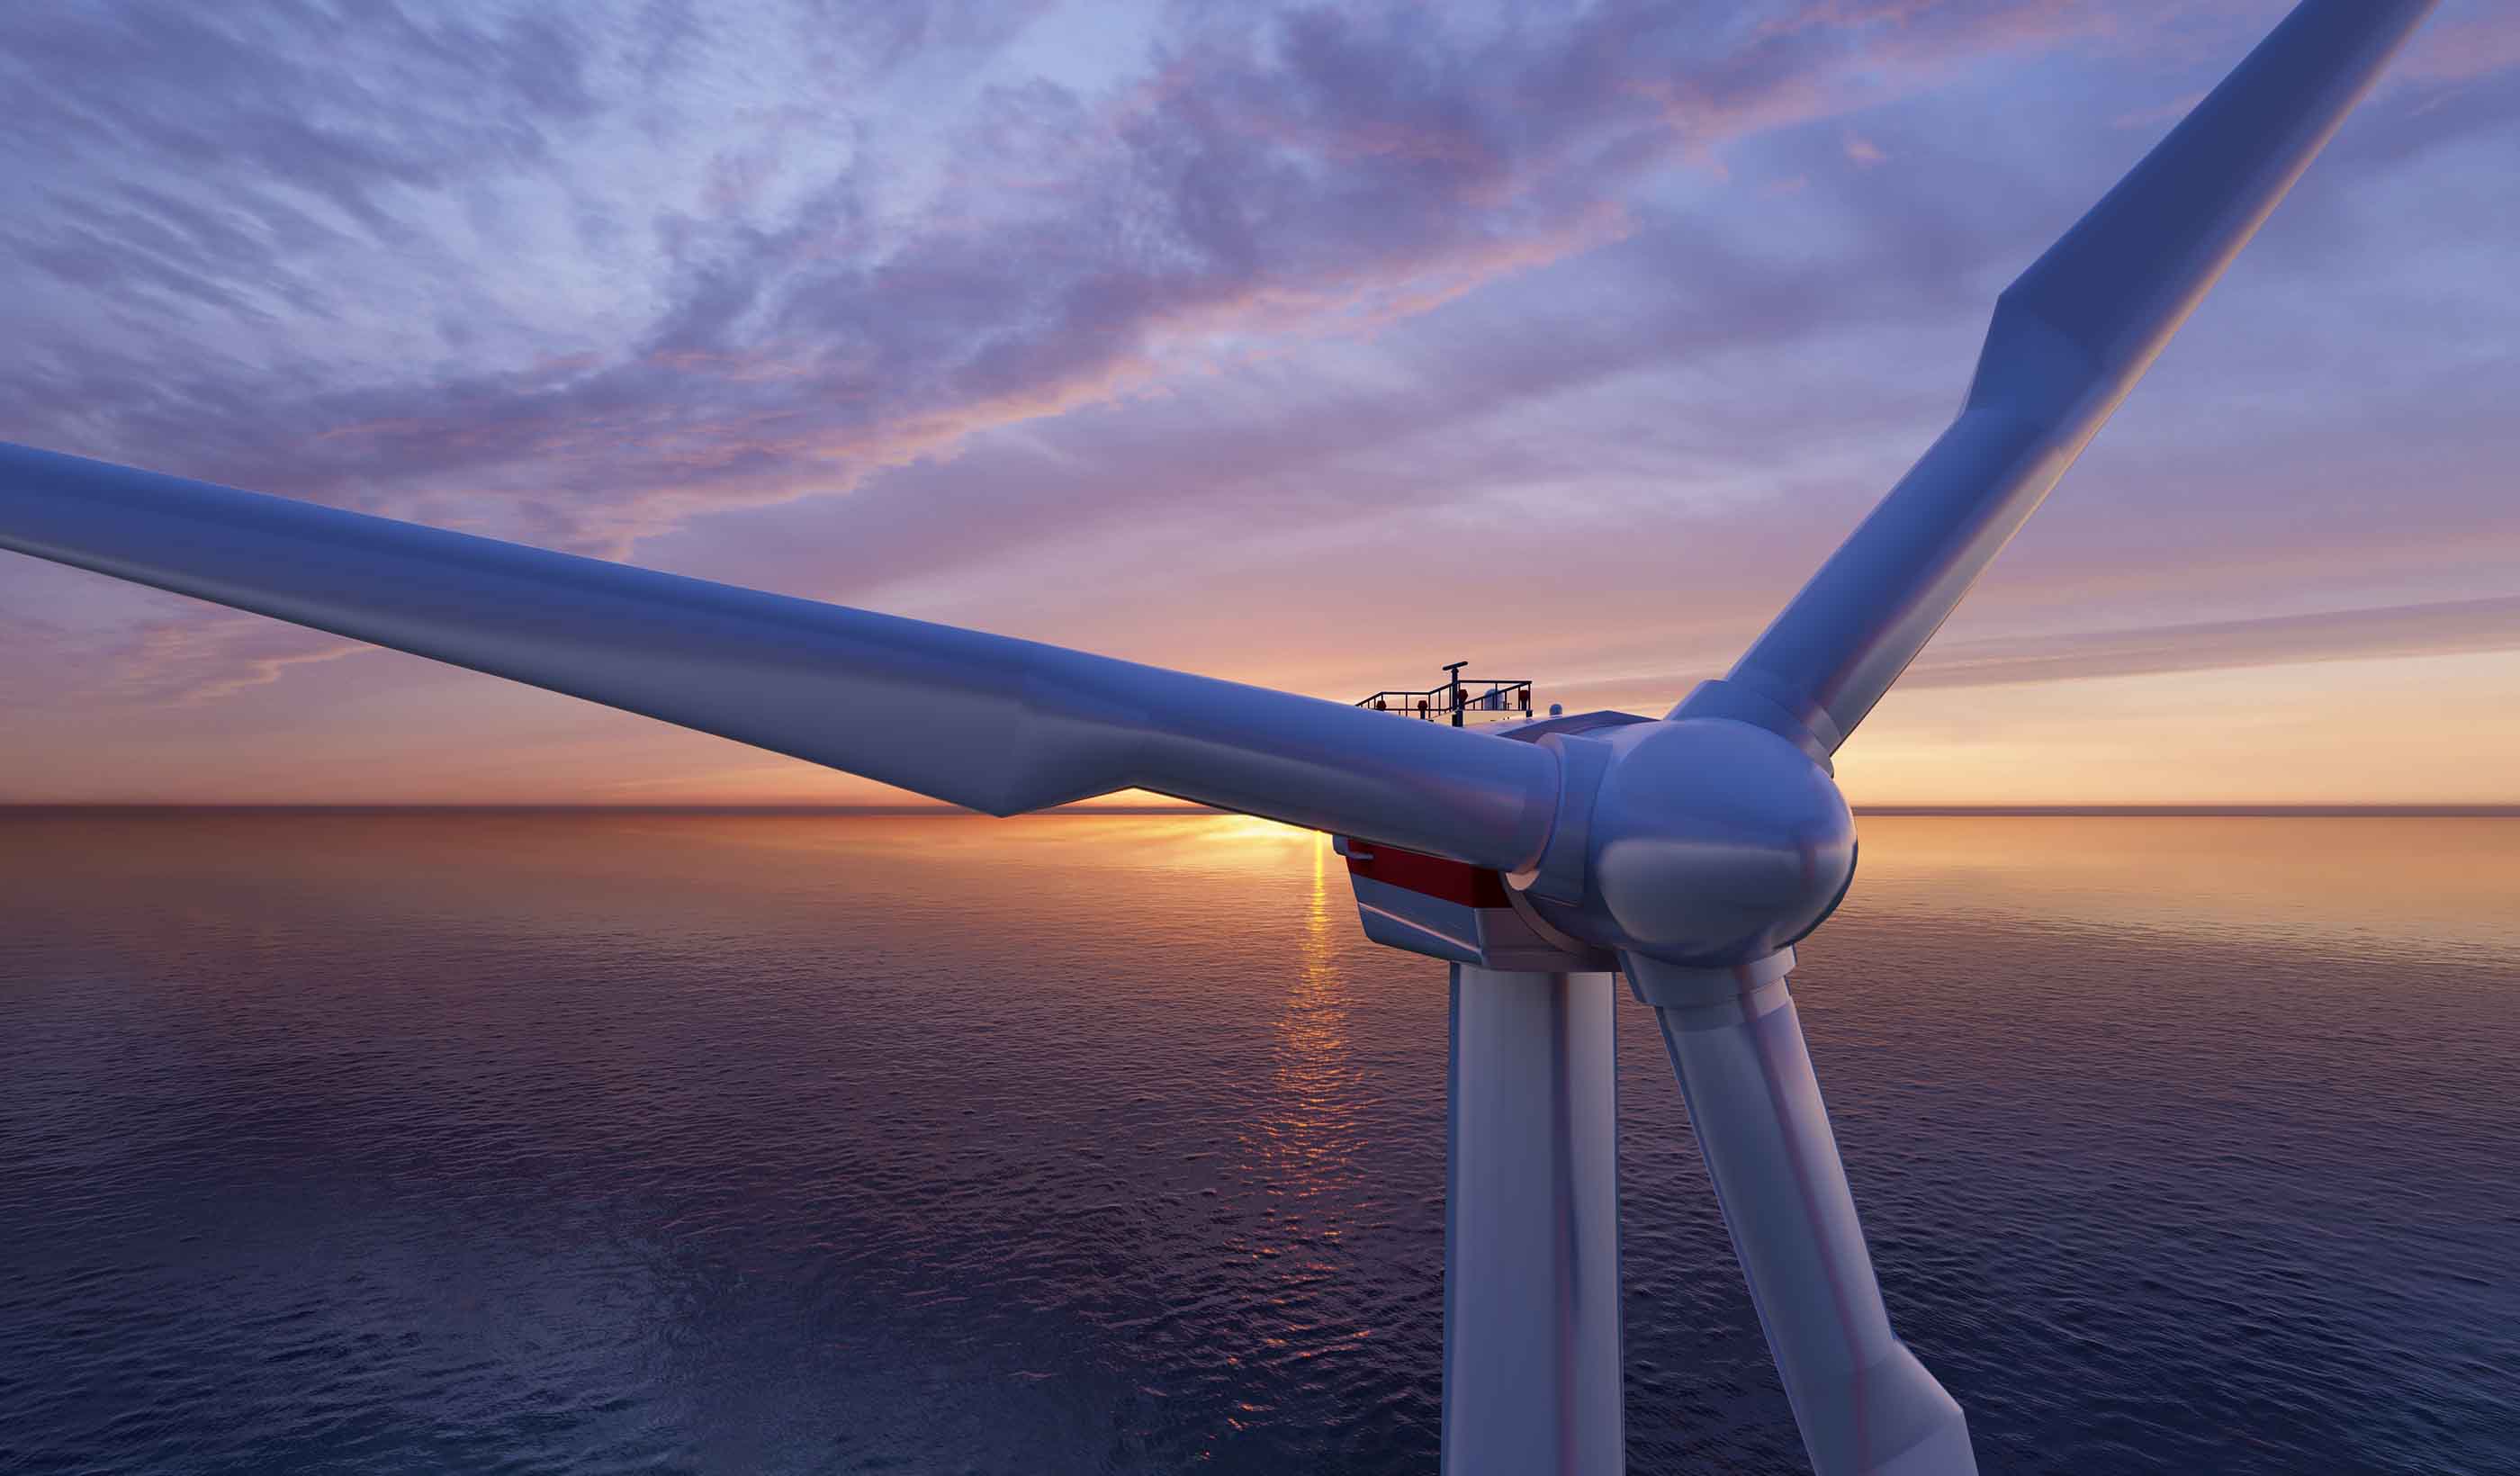 Floating offshore wind power could be the key to reaching decarbonization targets